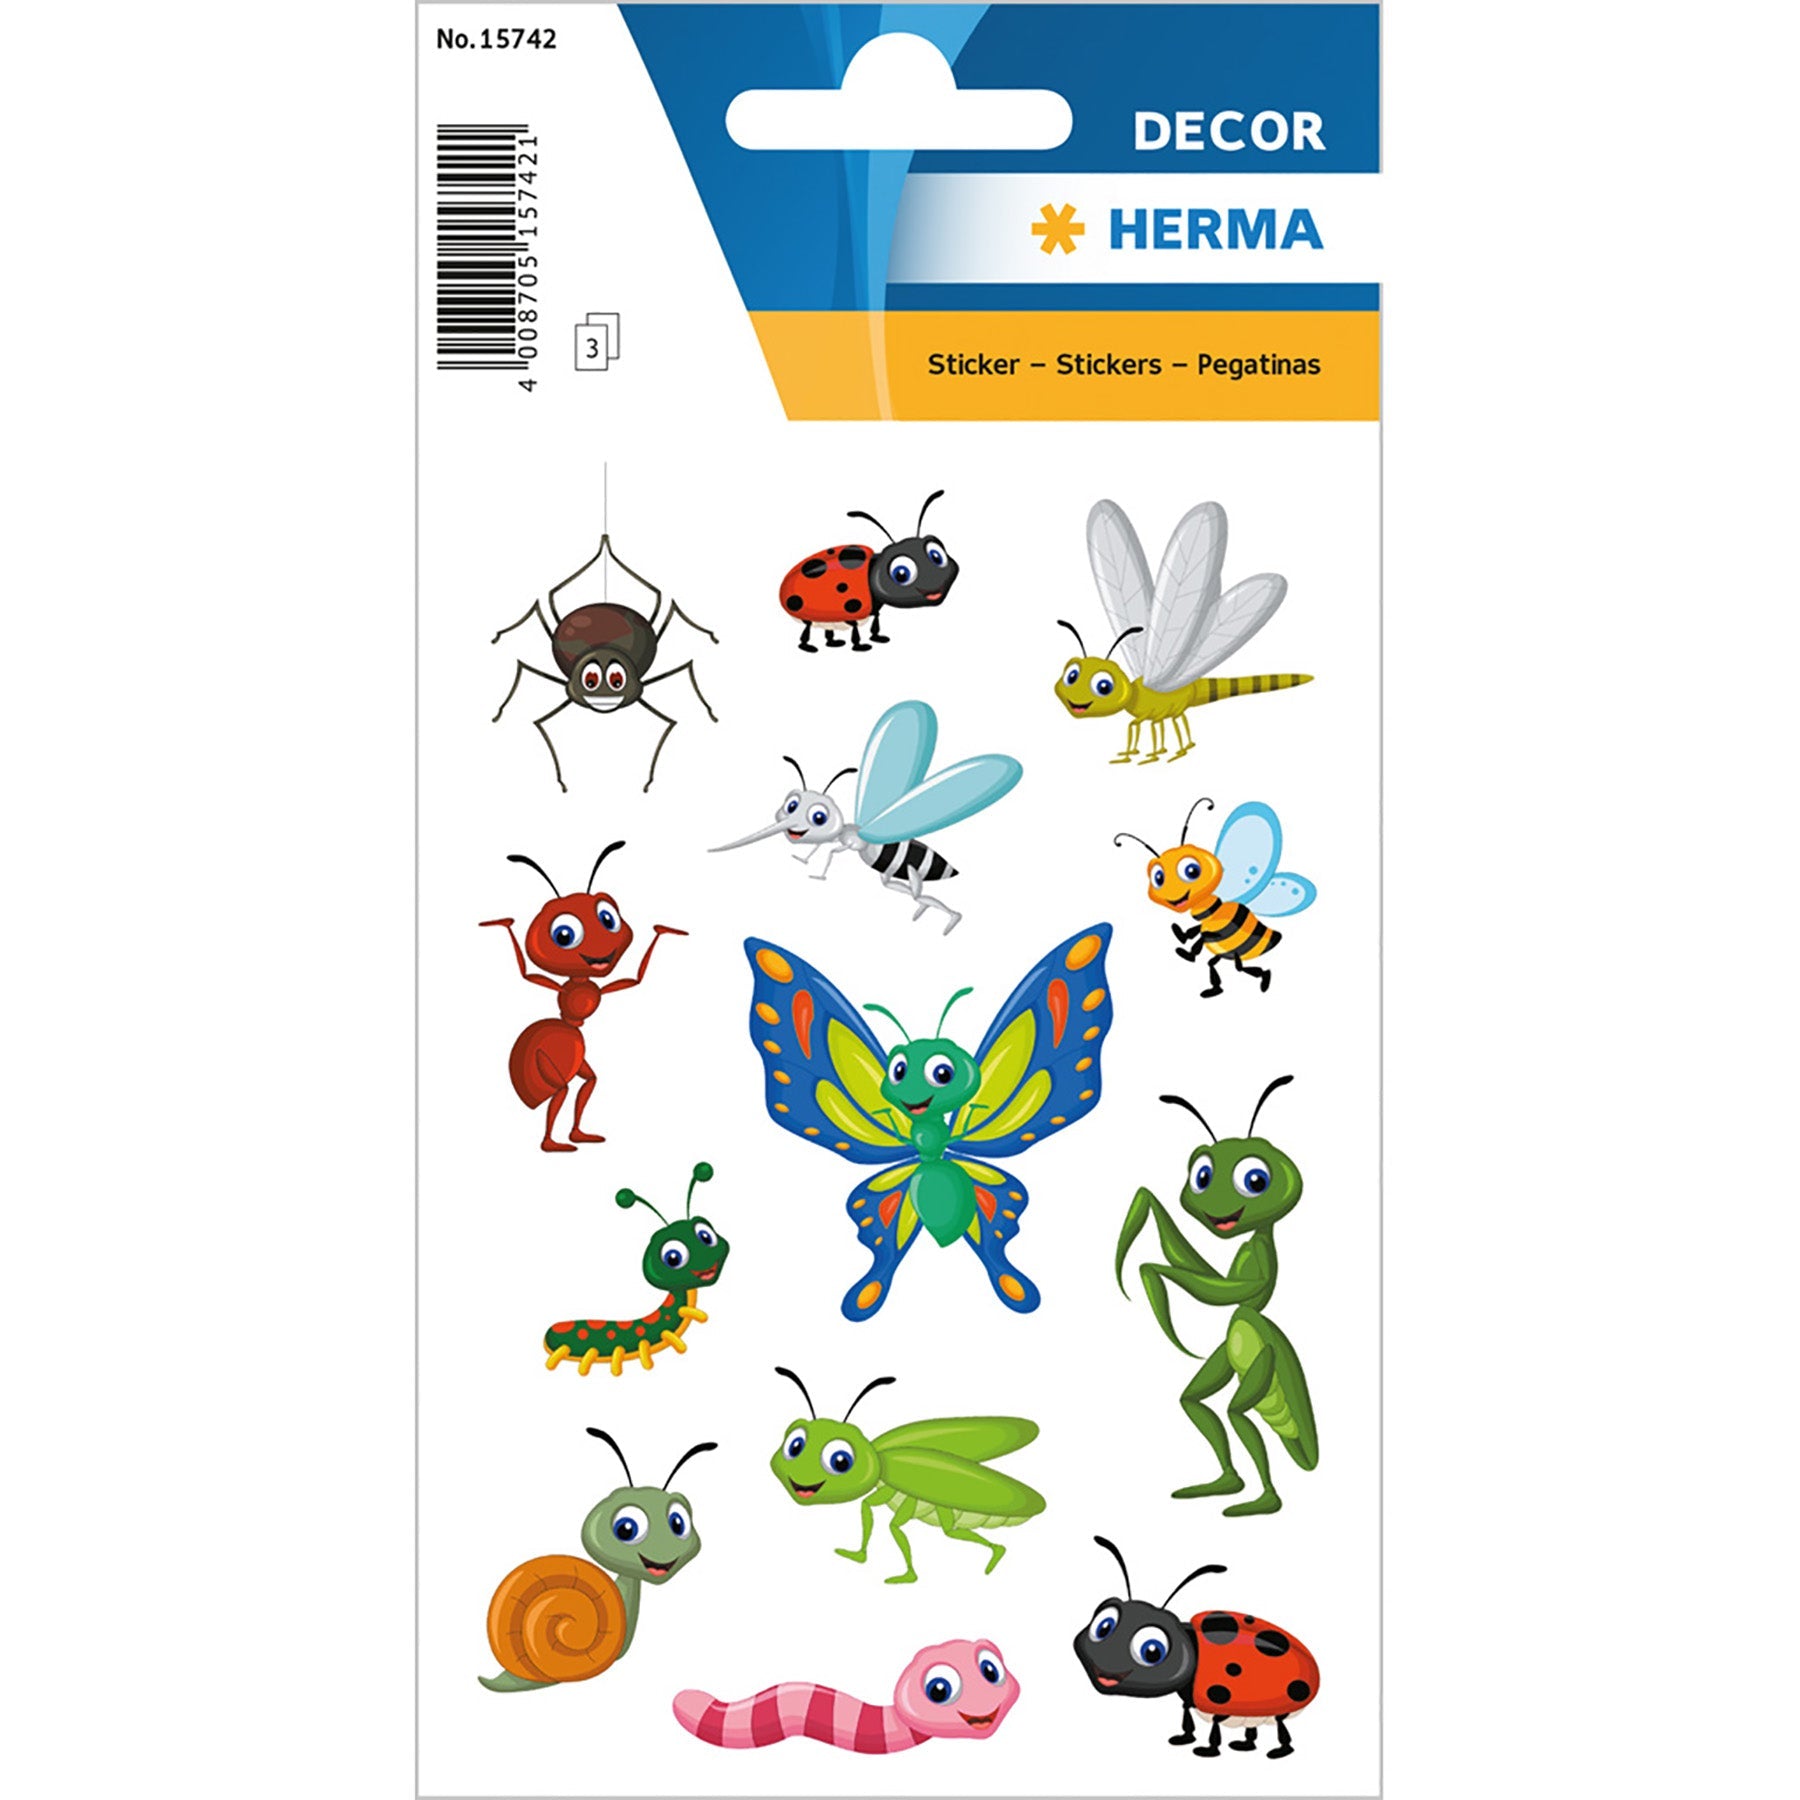 Herma Décor 3 Sheets Stickers Little Crawlies 4.75x3.1in Sheet